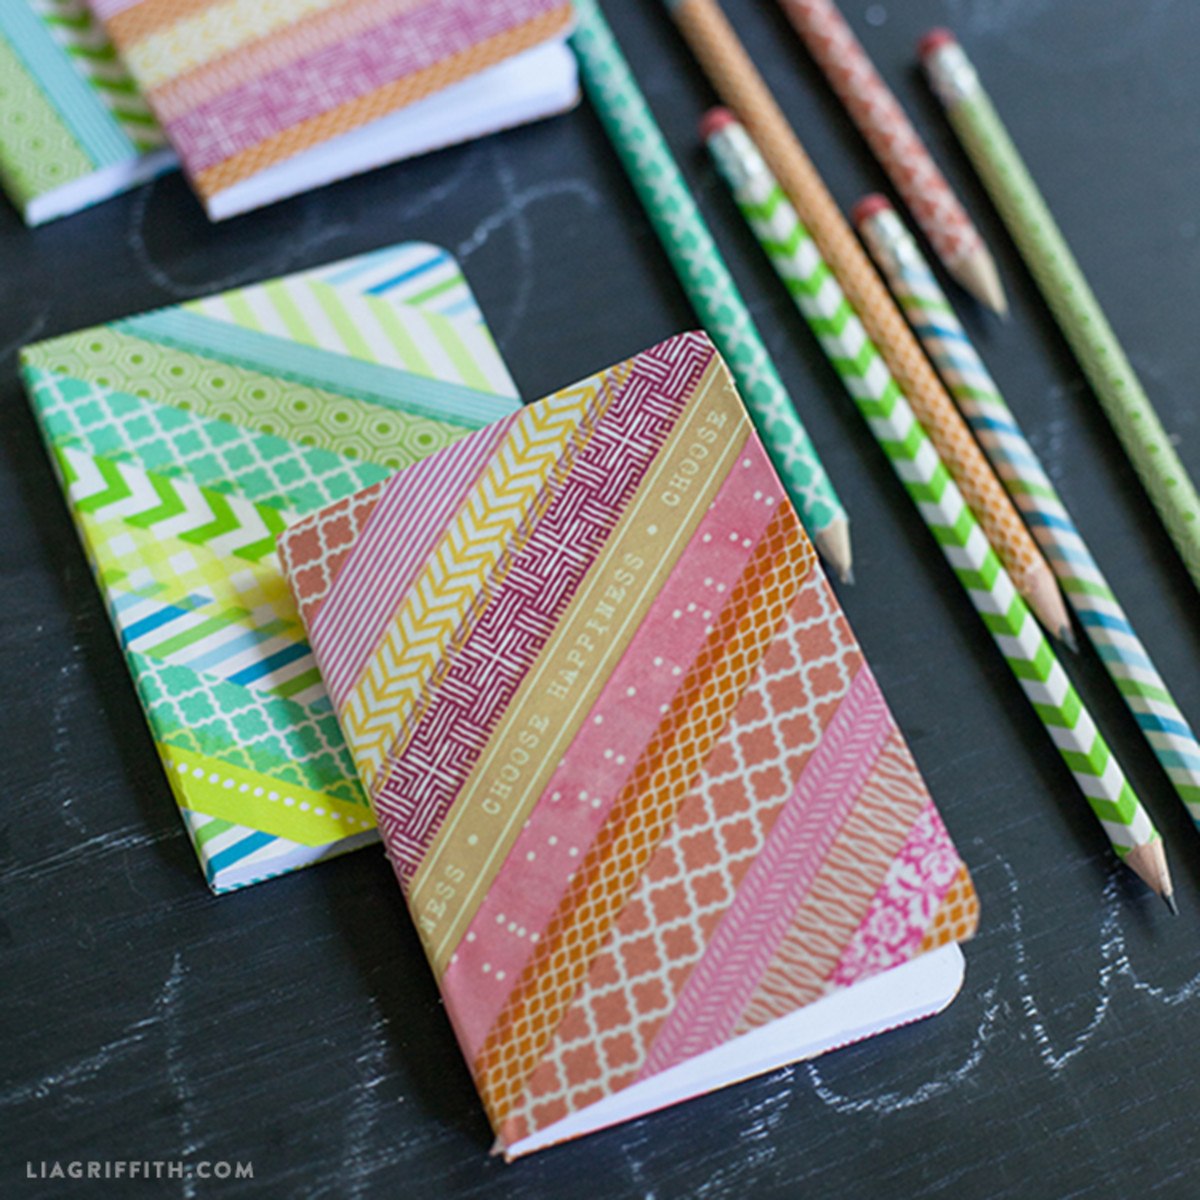 Washi Tape has hundreds of uses in crafts and home decor